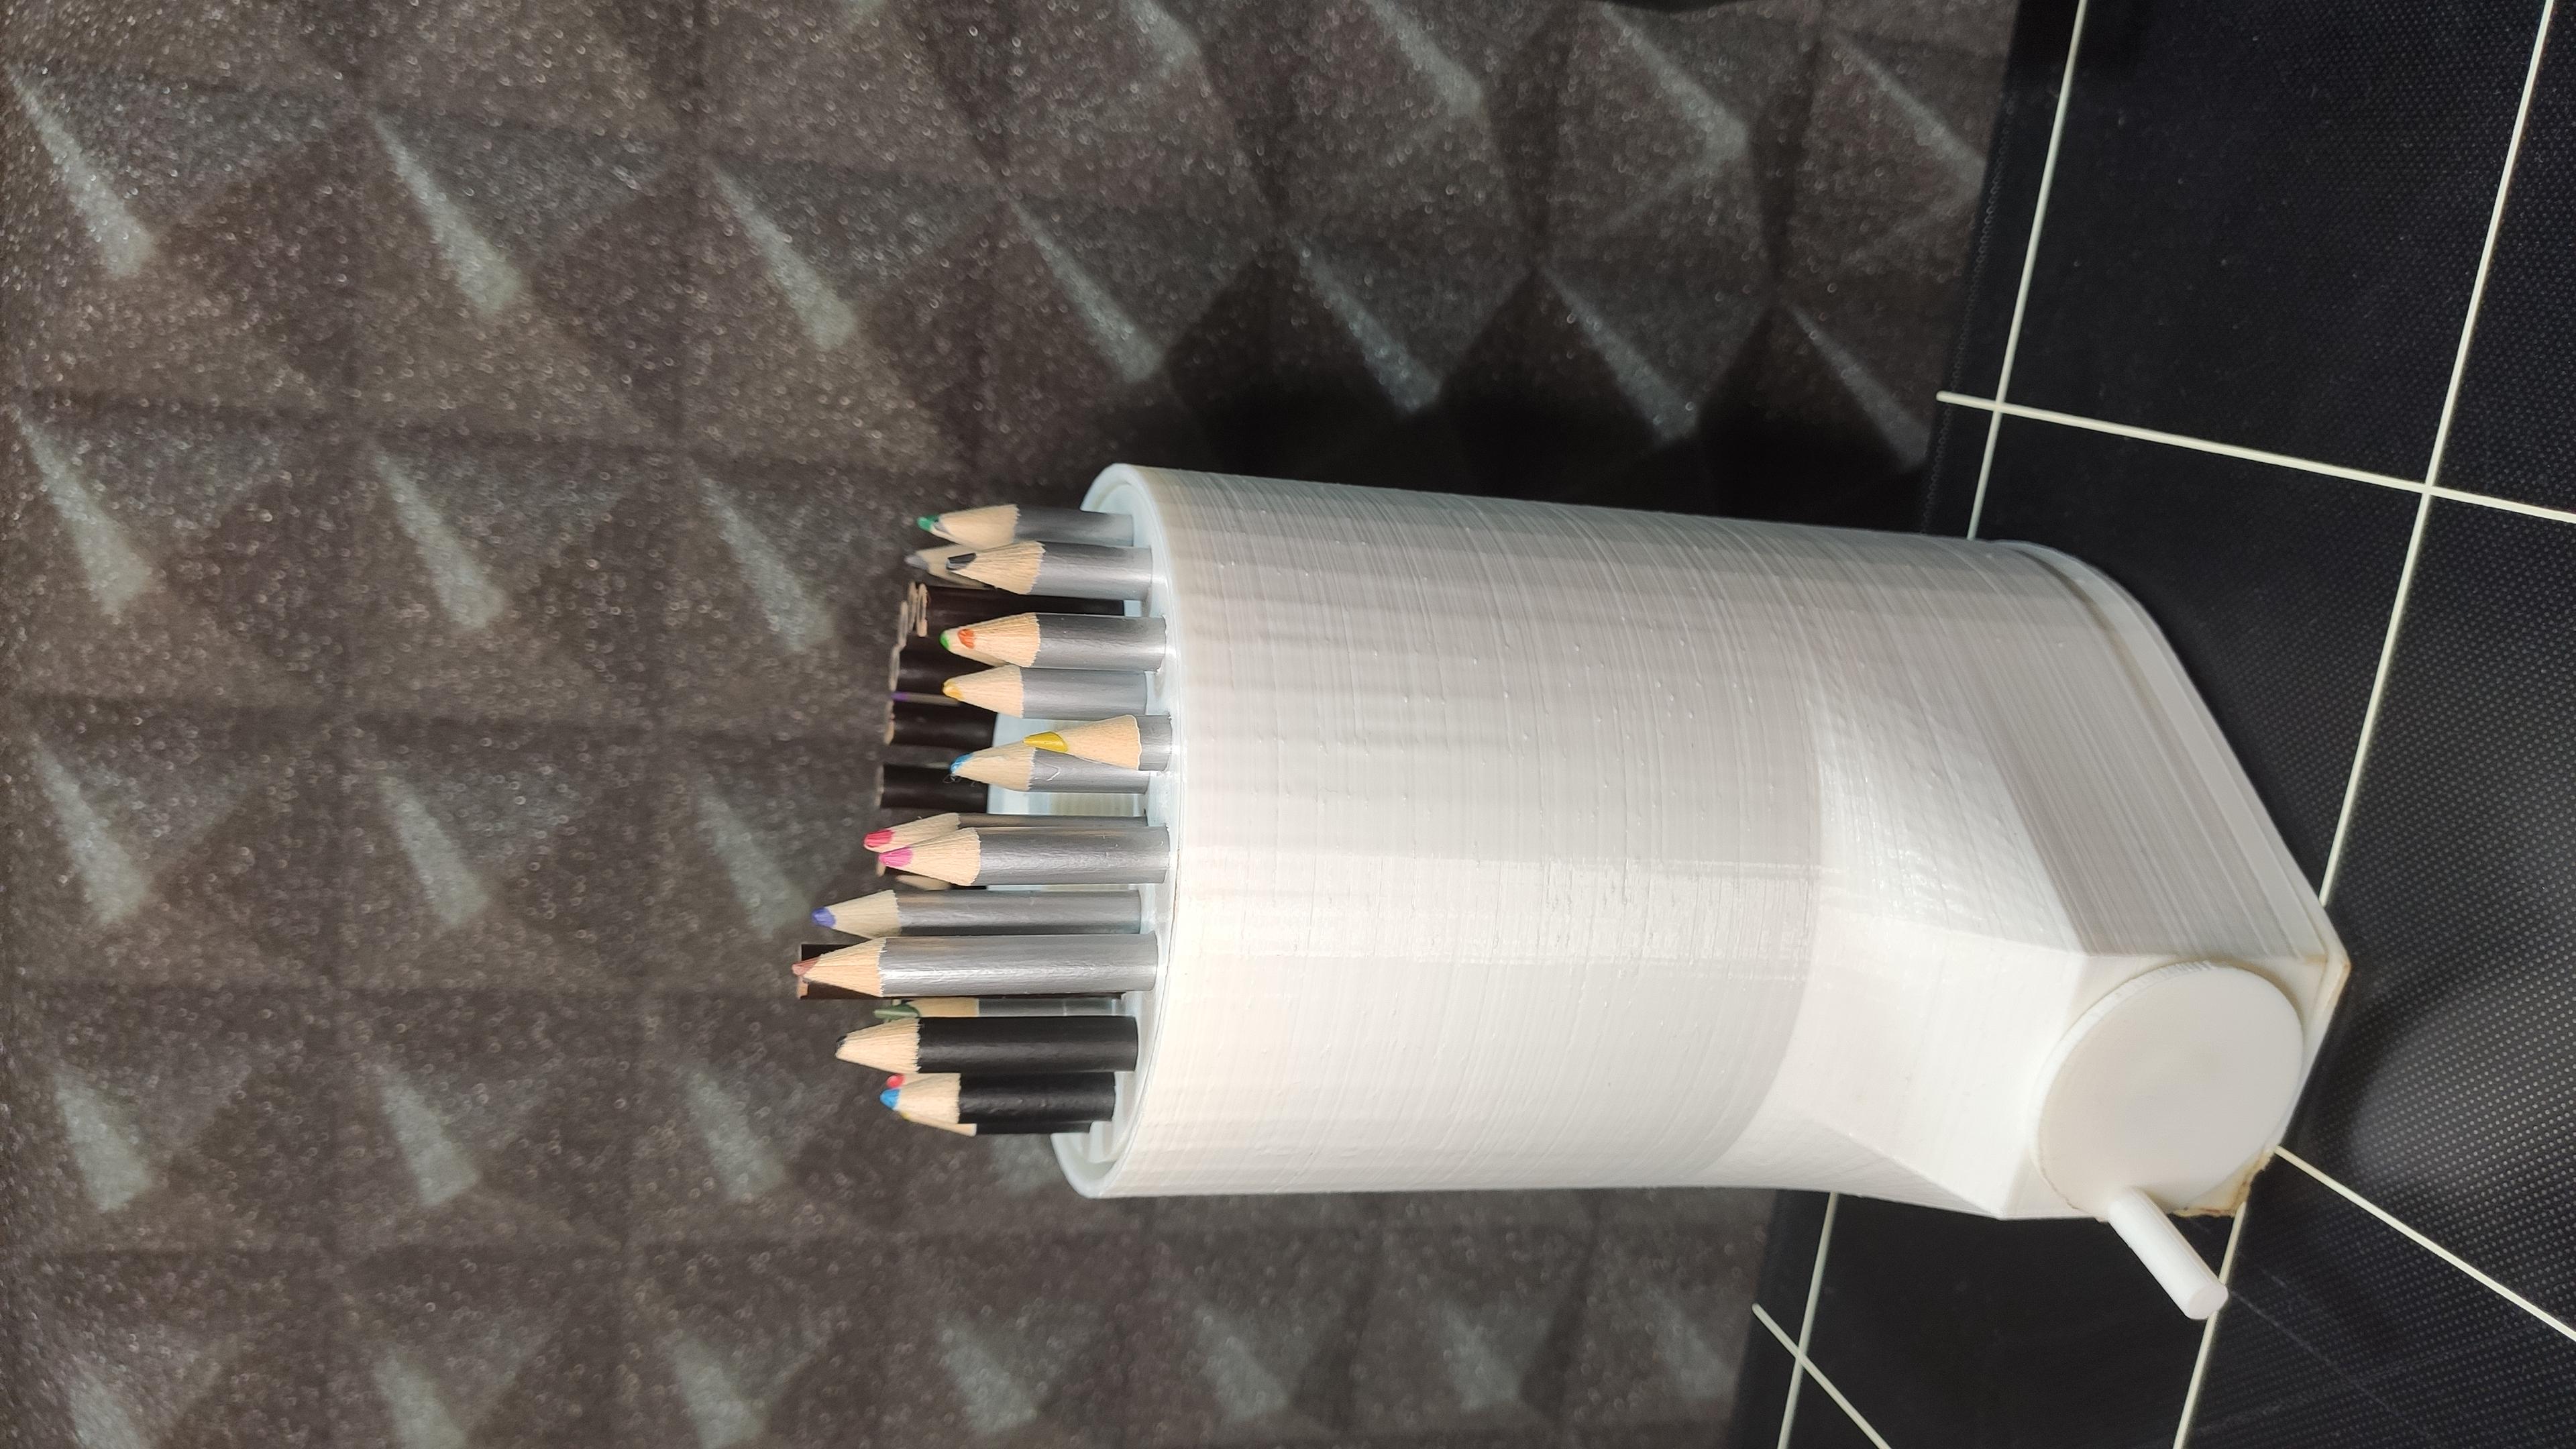 Pencil Carousel and Rotary Sharpener 3d model